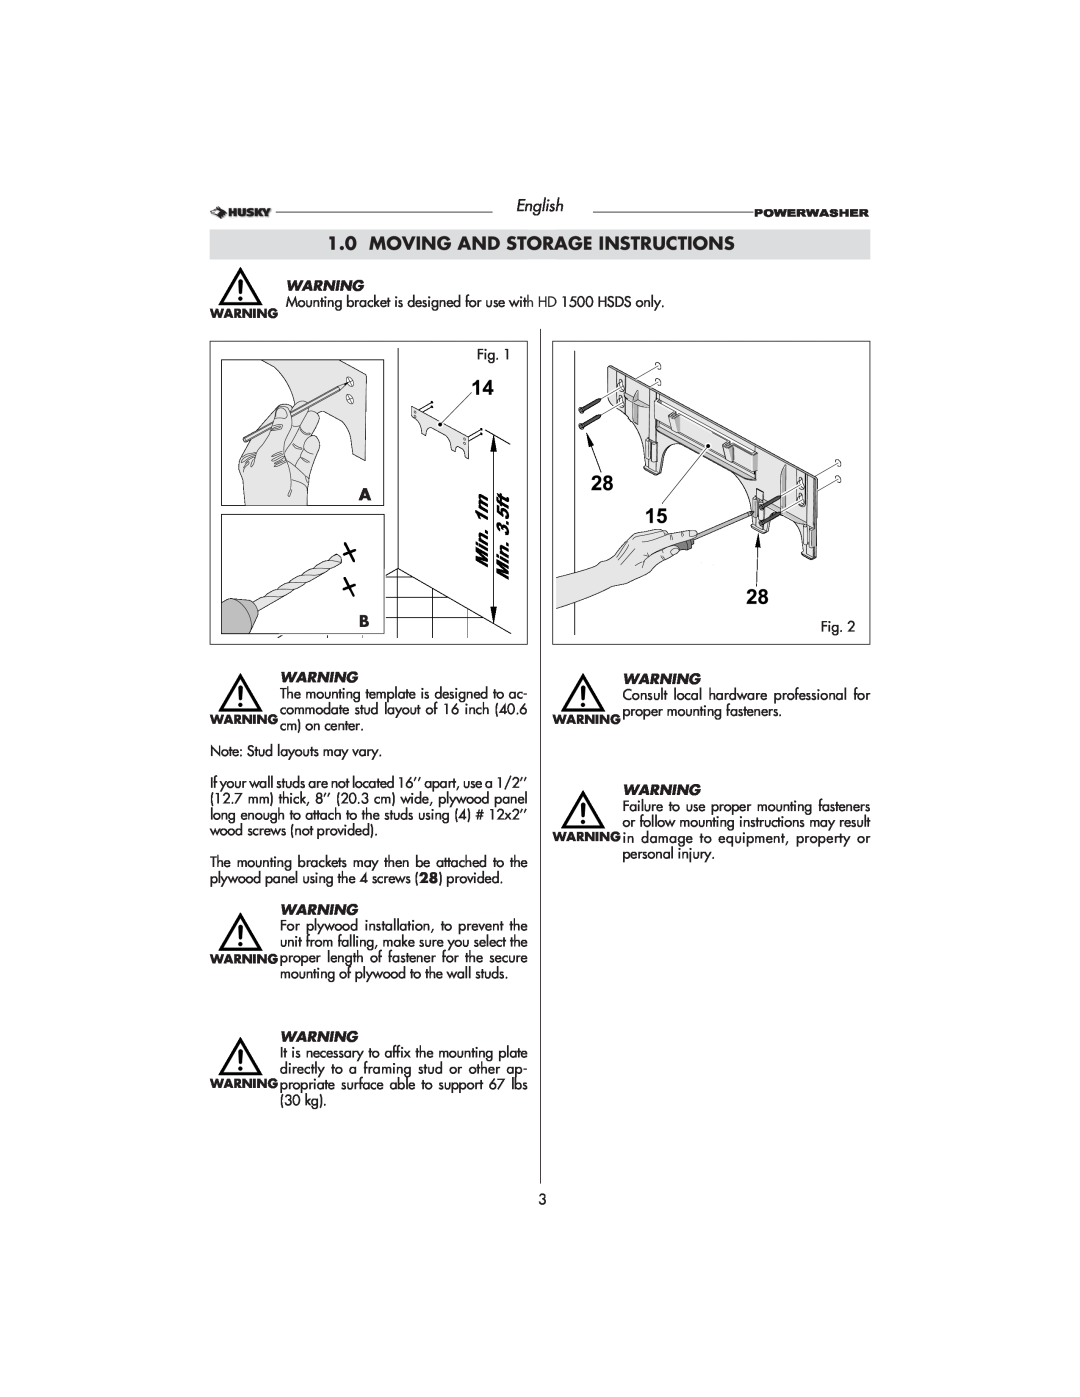 Husky HD1500 warranty Moving And Storage Instructions, English, Fig 